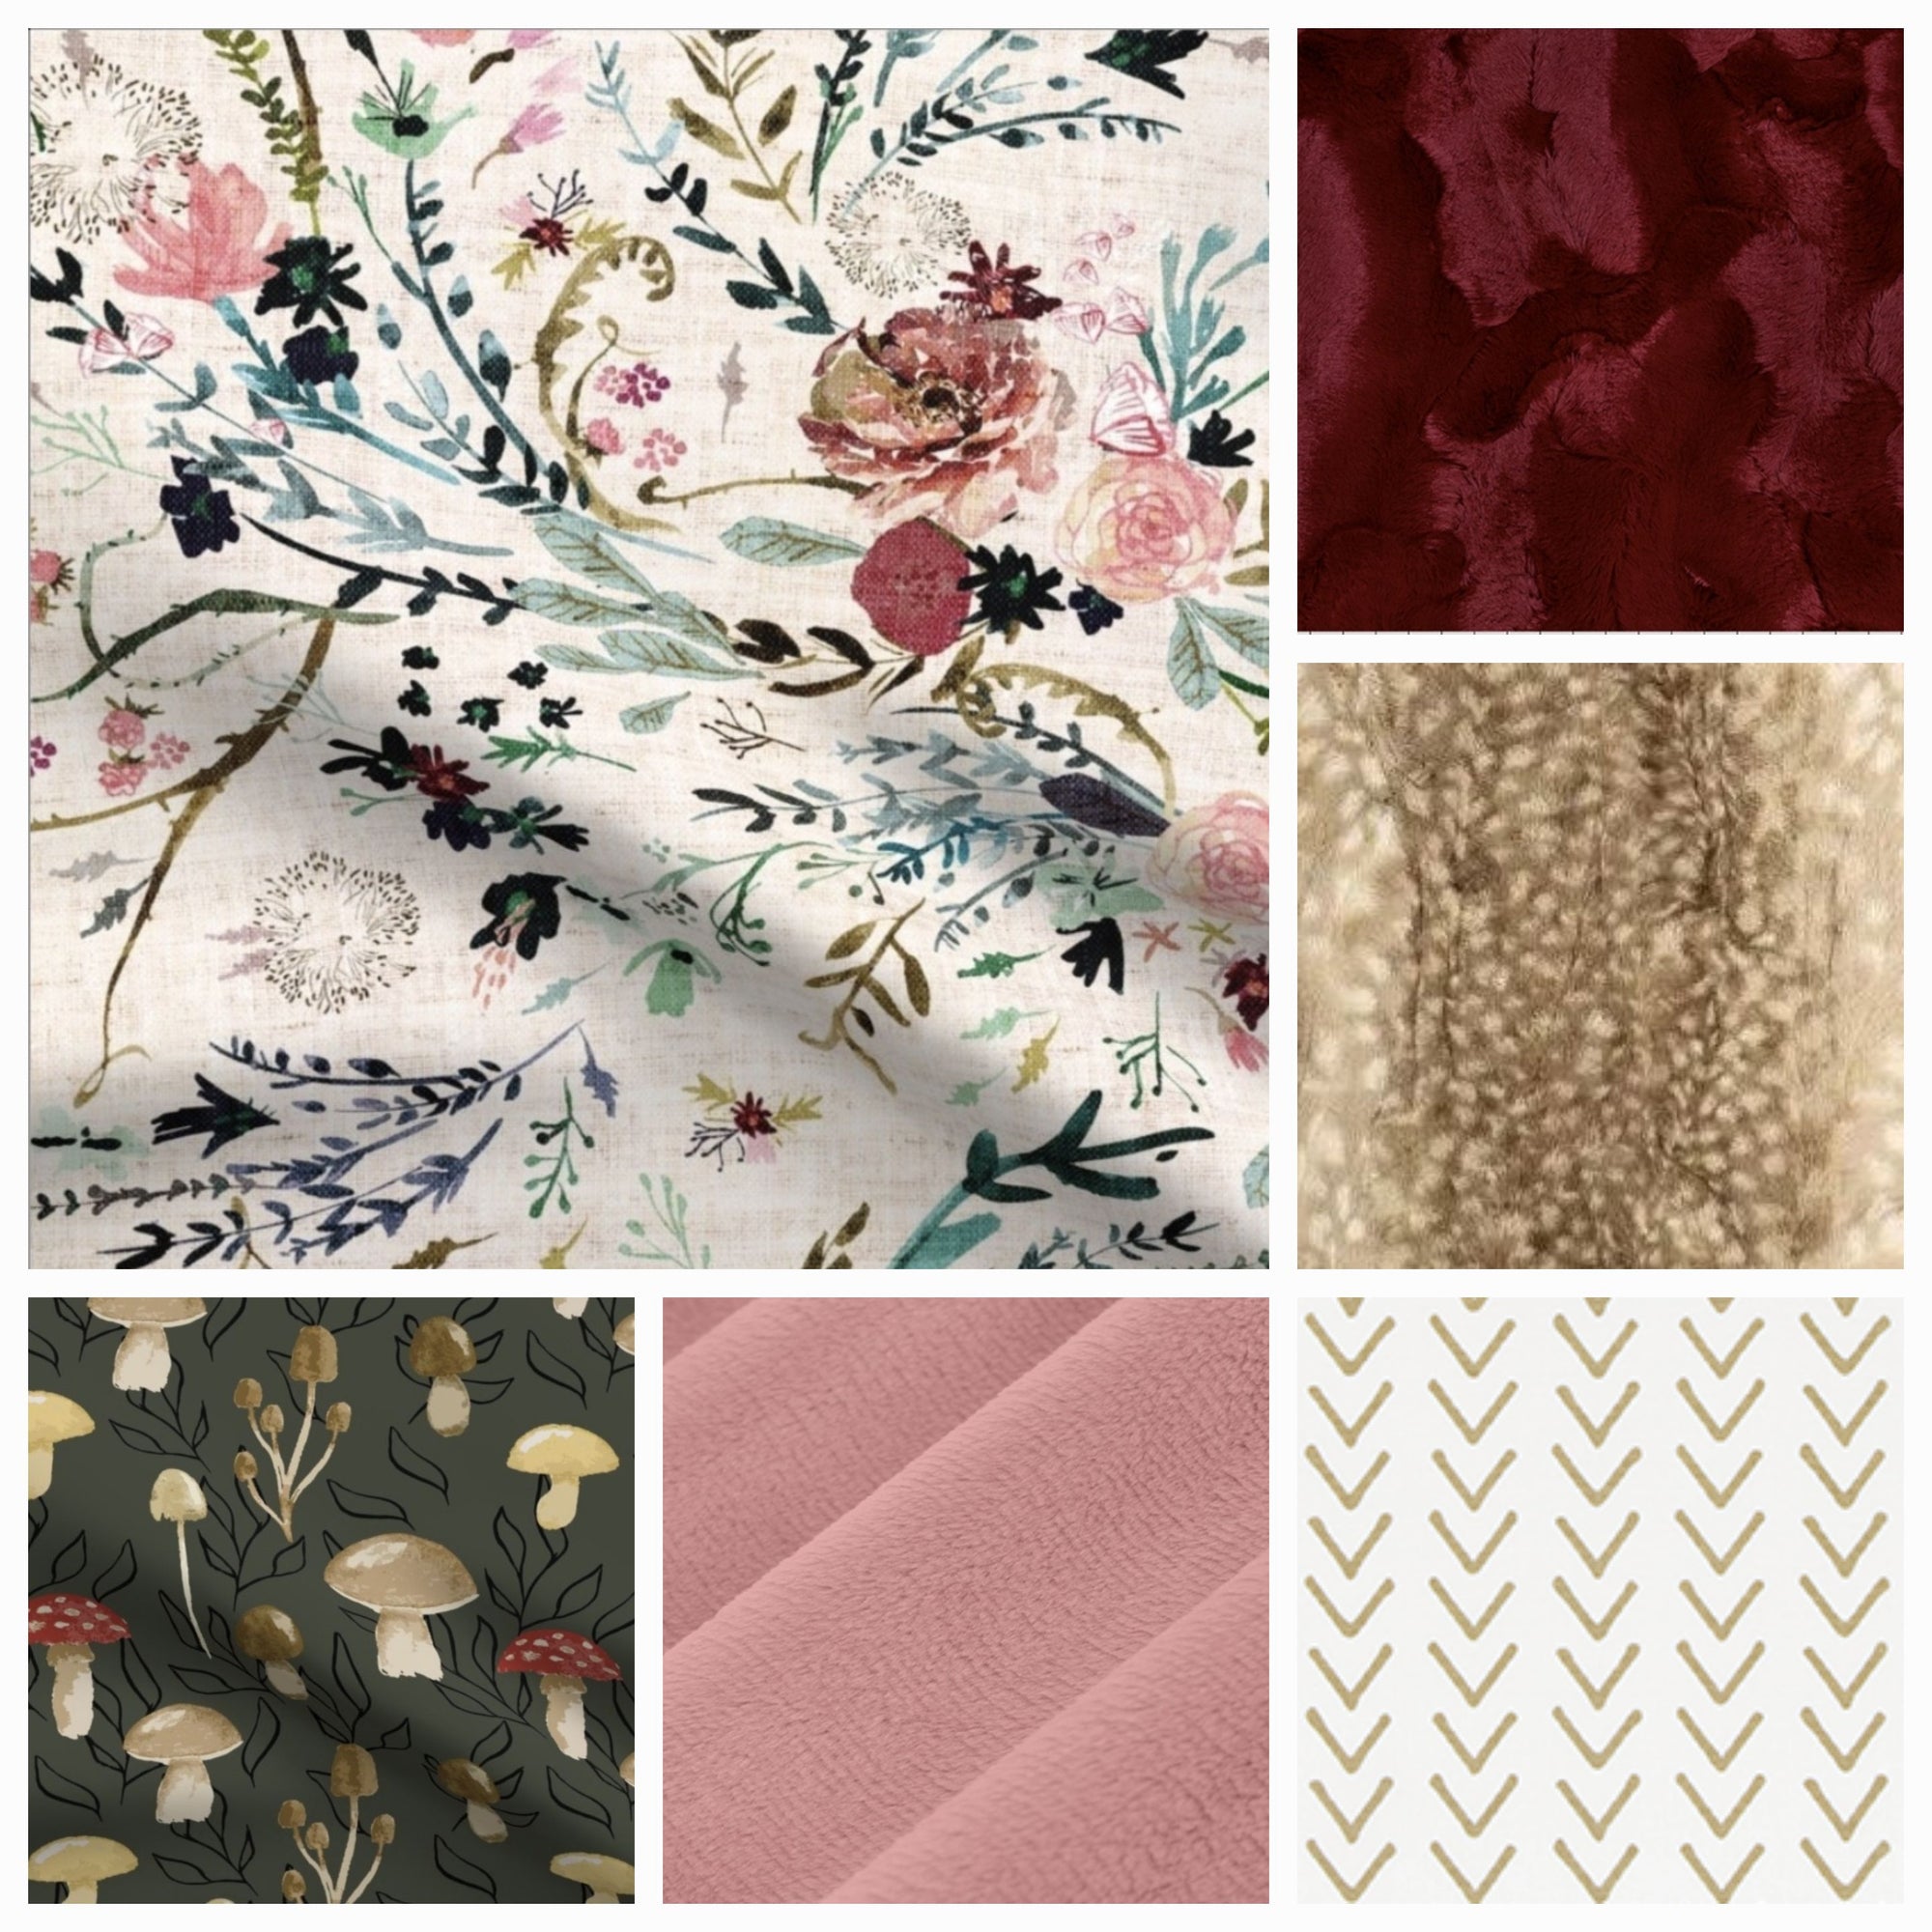 New Release Girl Crib Bedding- Whimsical Woodlanf Floral Baby Bedding & Nursery Collection - DBC Baby Bedding Co 